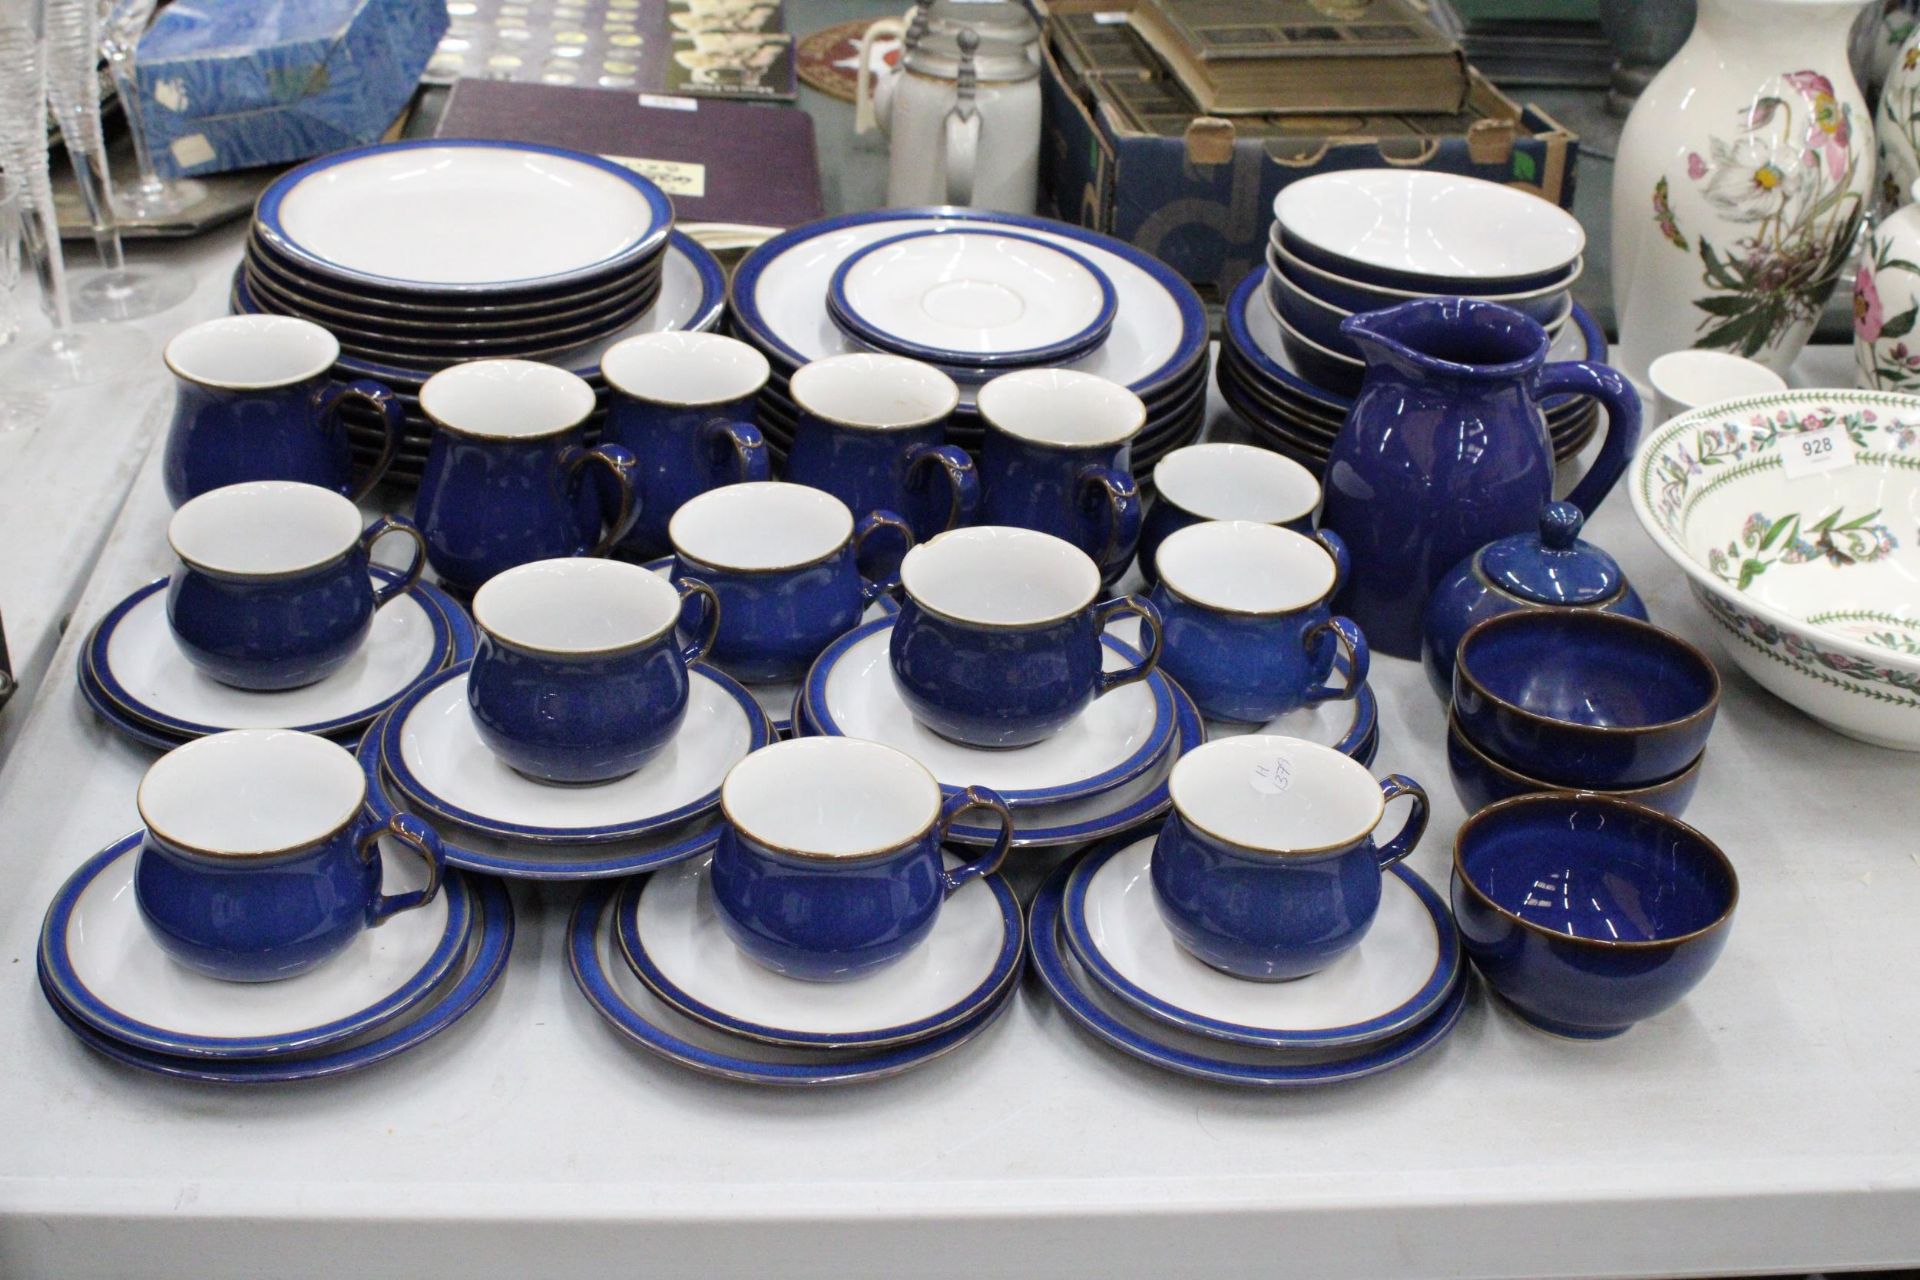 A DENBY COBALT BLUE DINNER SERVICE TO INCLUDE VARIOUS SIZES OF PLATES, BOWLS, A LARGE JUG, SUGAR